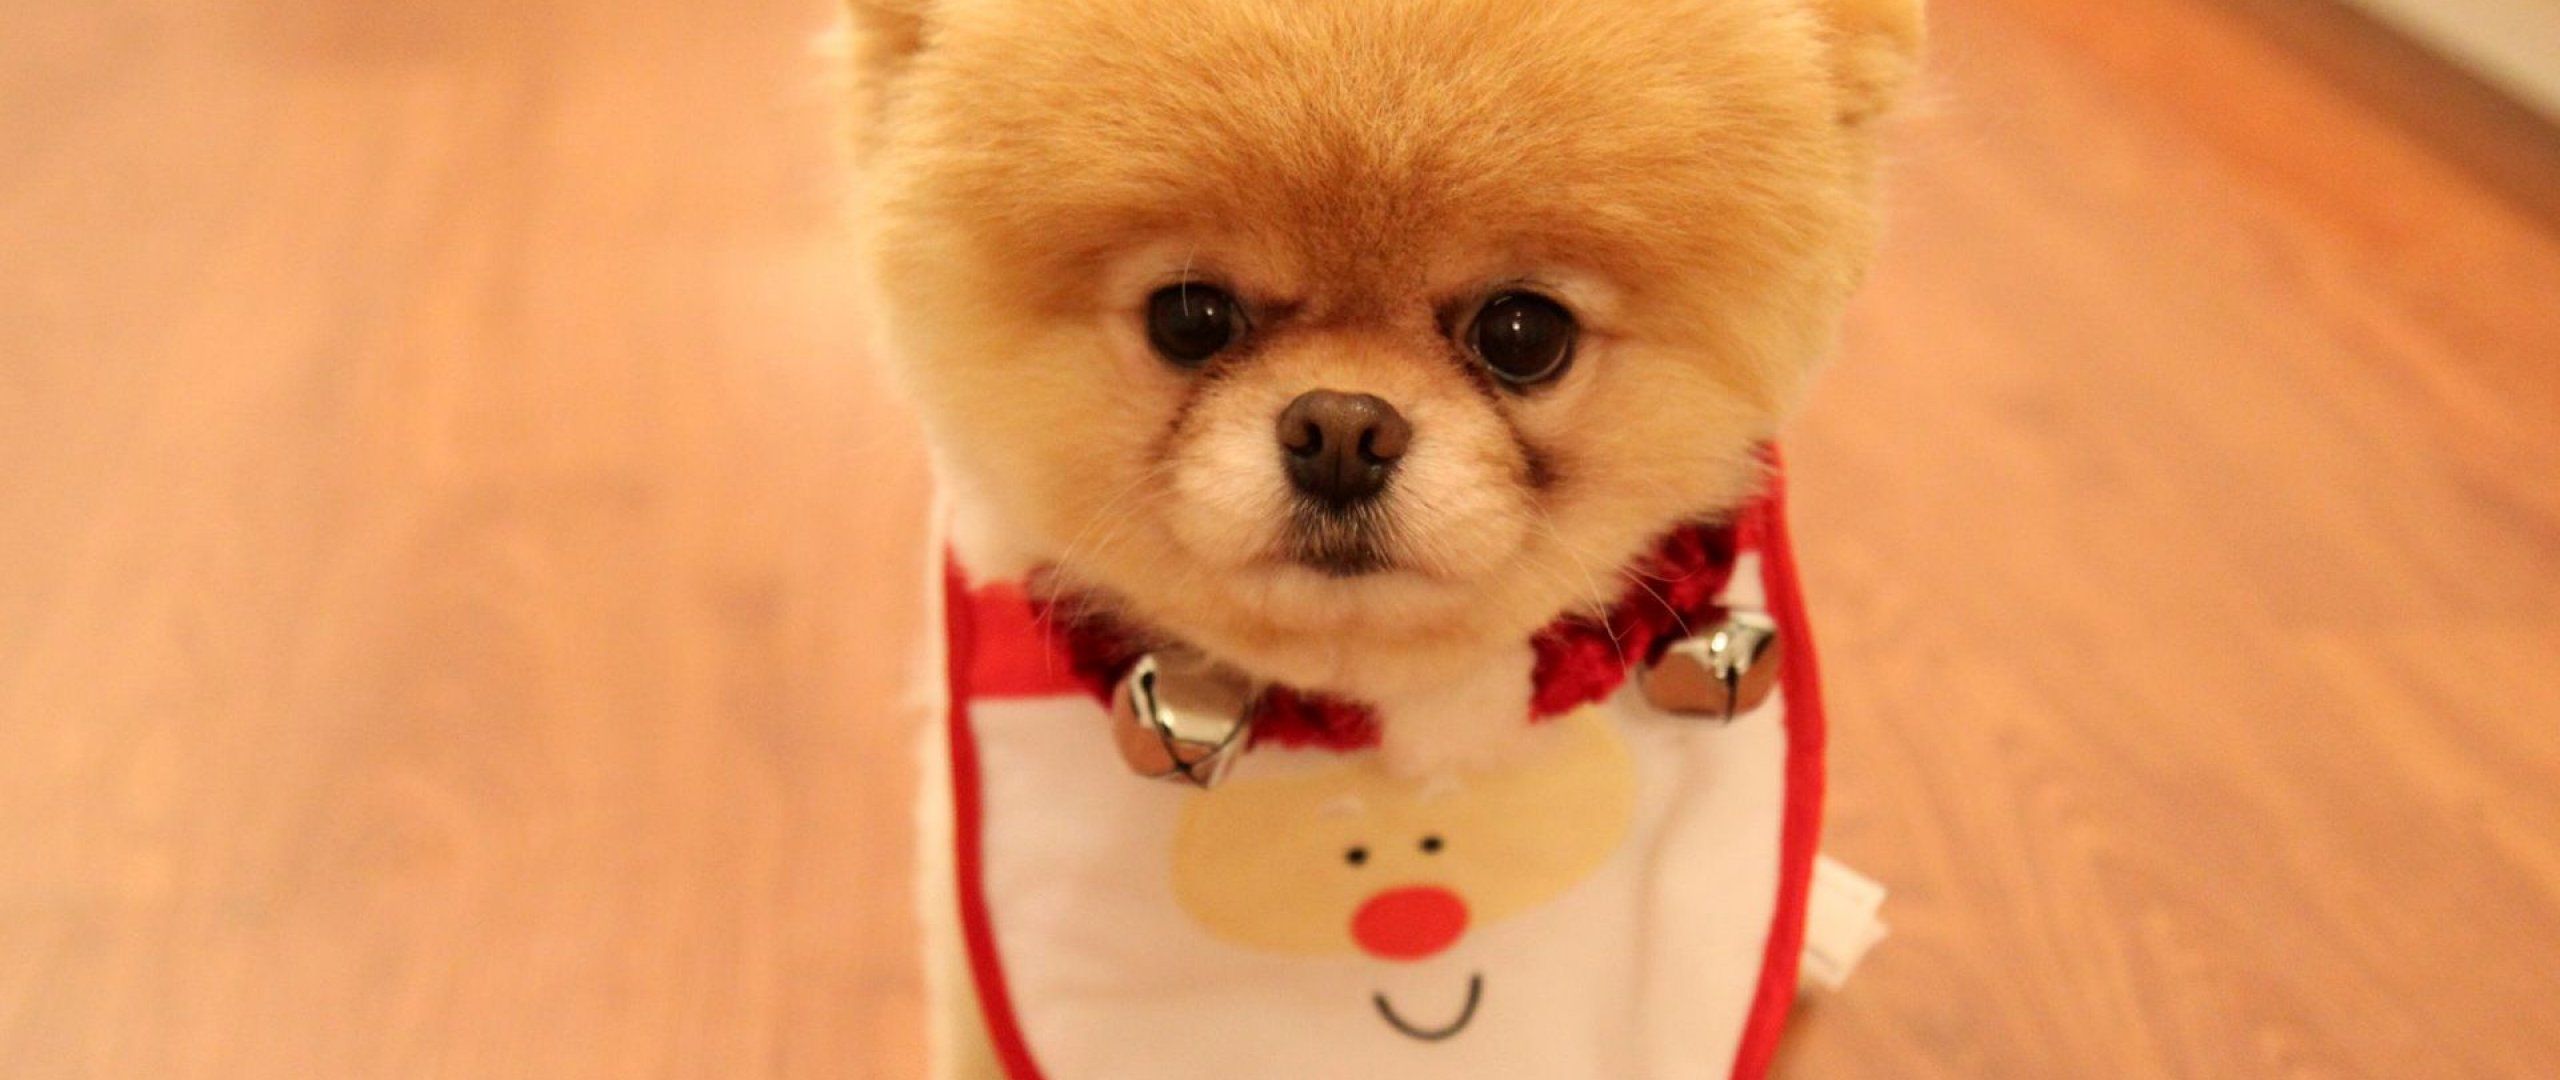 Cute Dog Christmas, High Res Wallpaper Image For Download